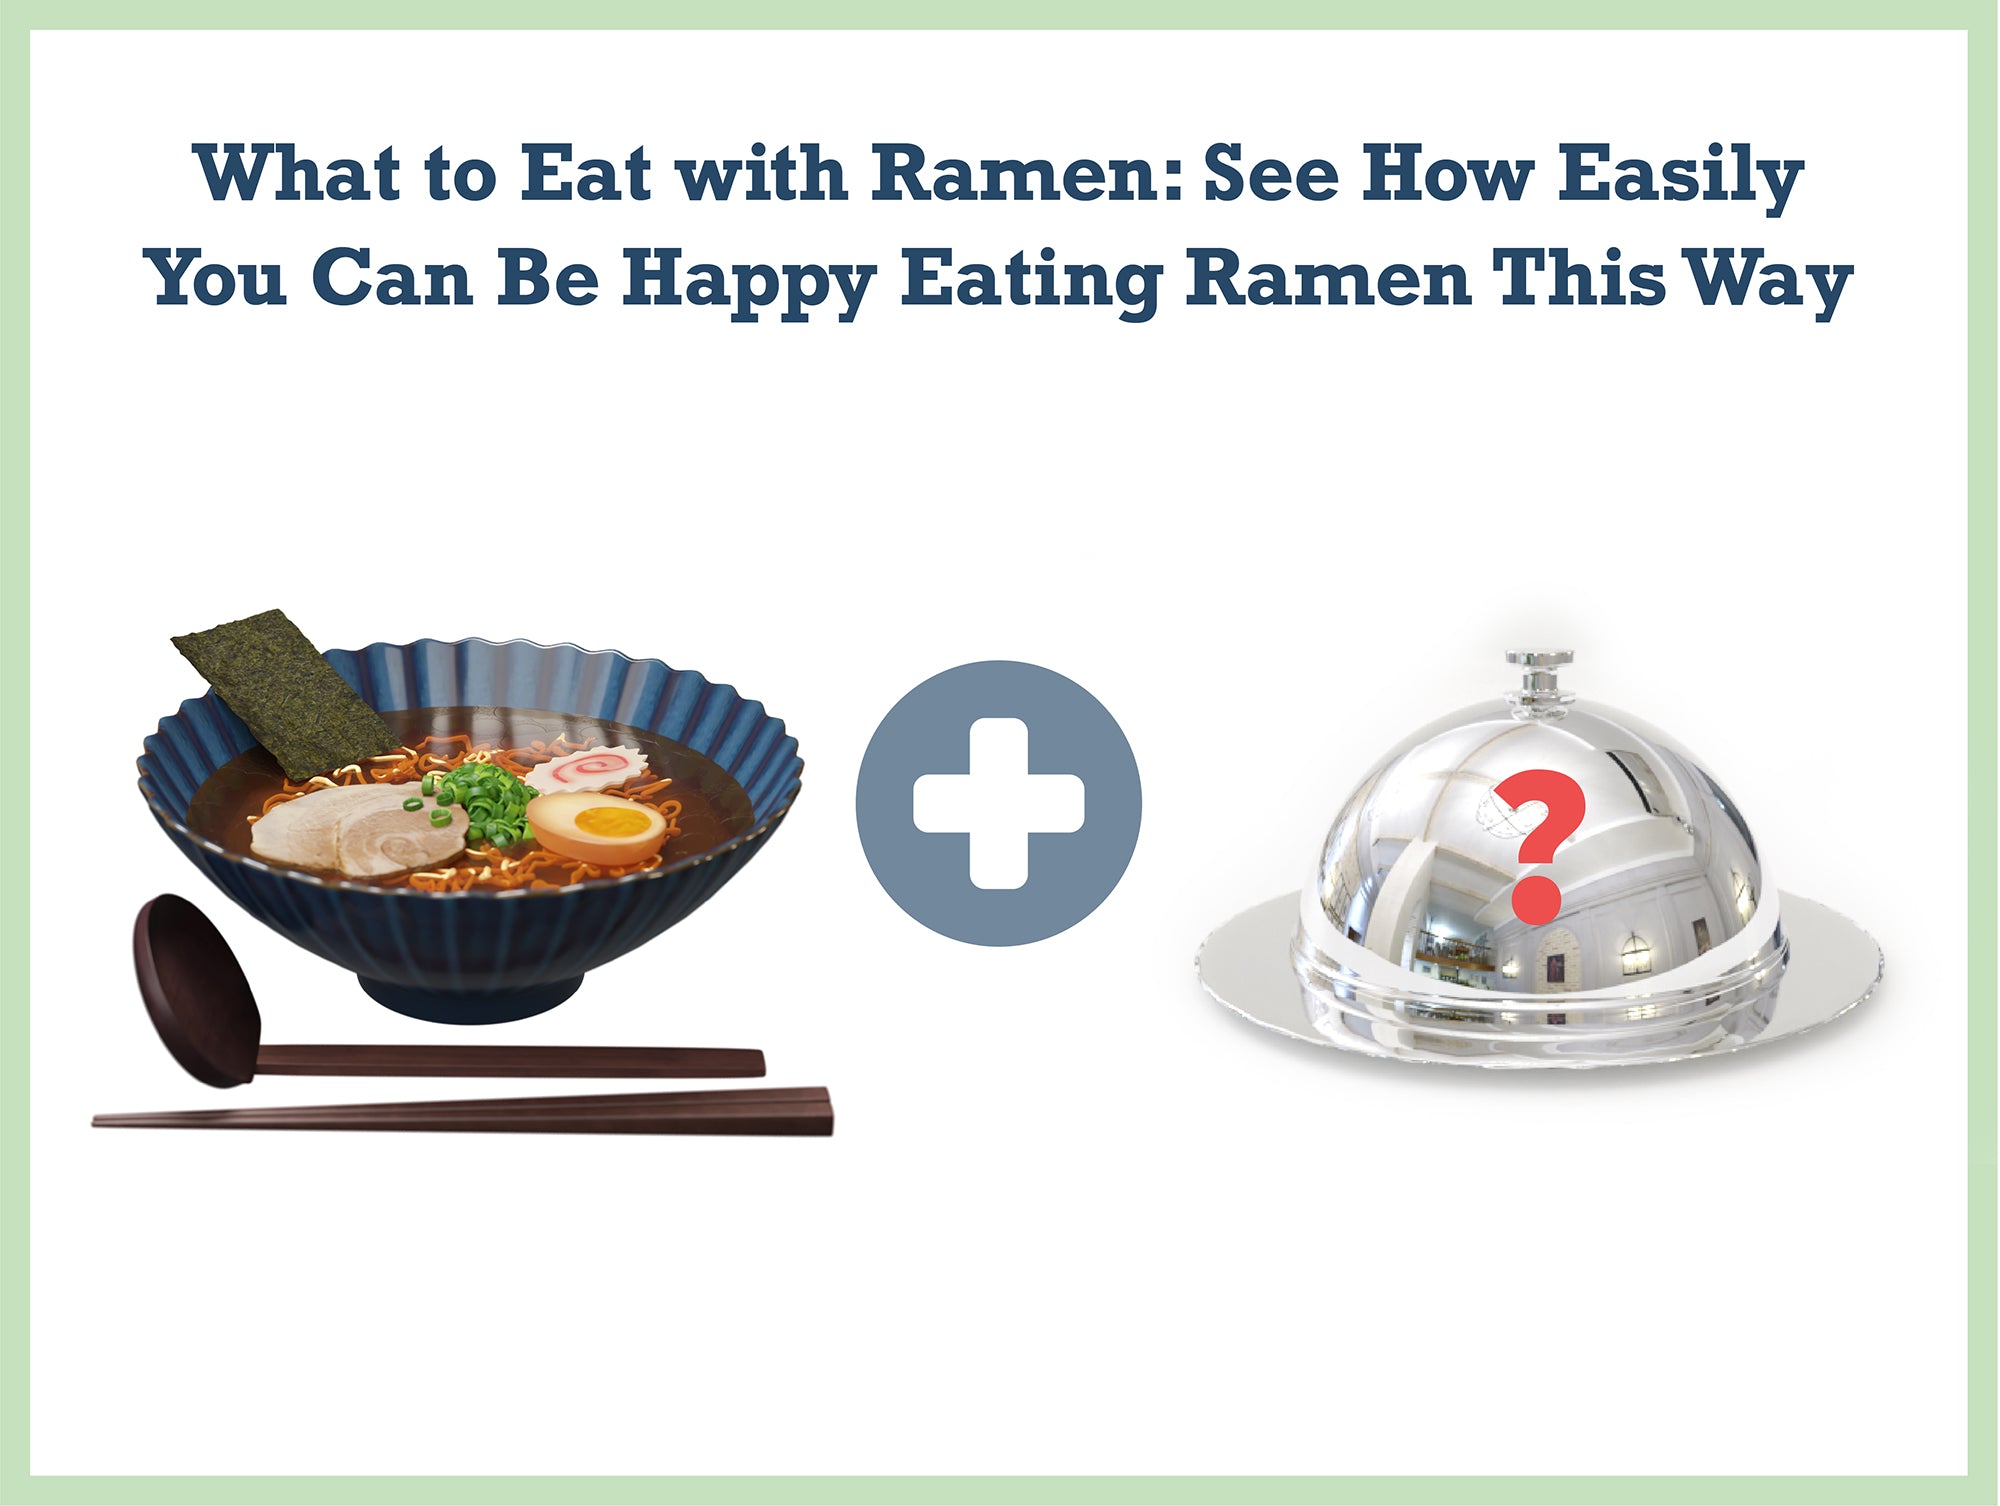 What to Eat with Ramen: See How Easily You Can Be Happy Eating Ramen This Way